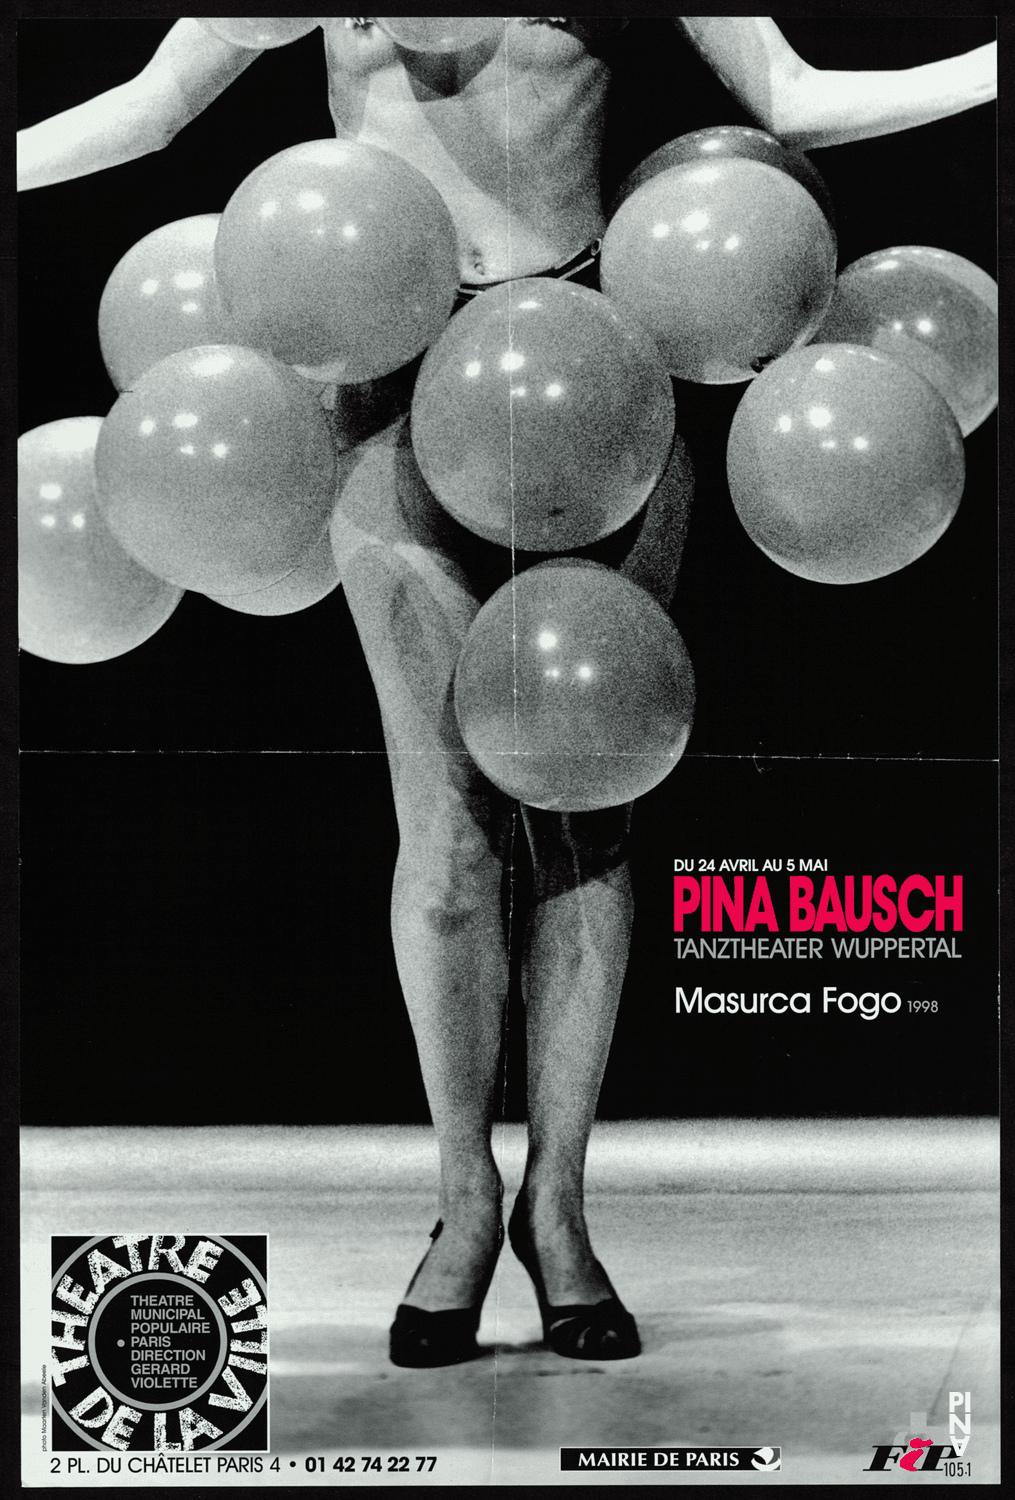 Poster for “Masurca Fogo” by Pina Bausch in Paris, 04/24/1999 – 05/05/1999